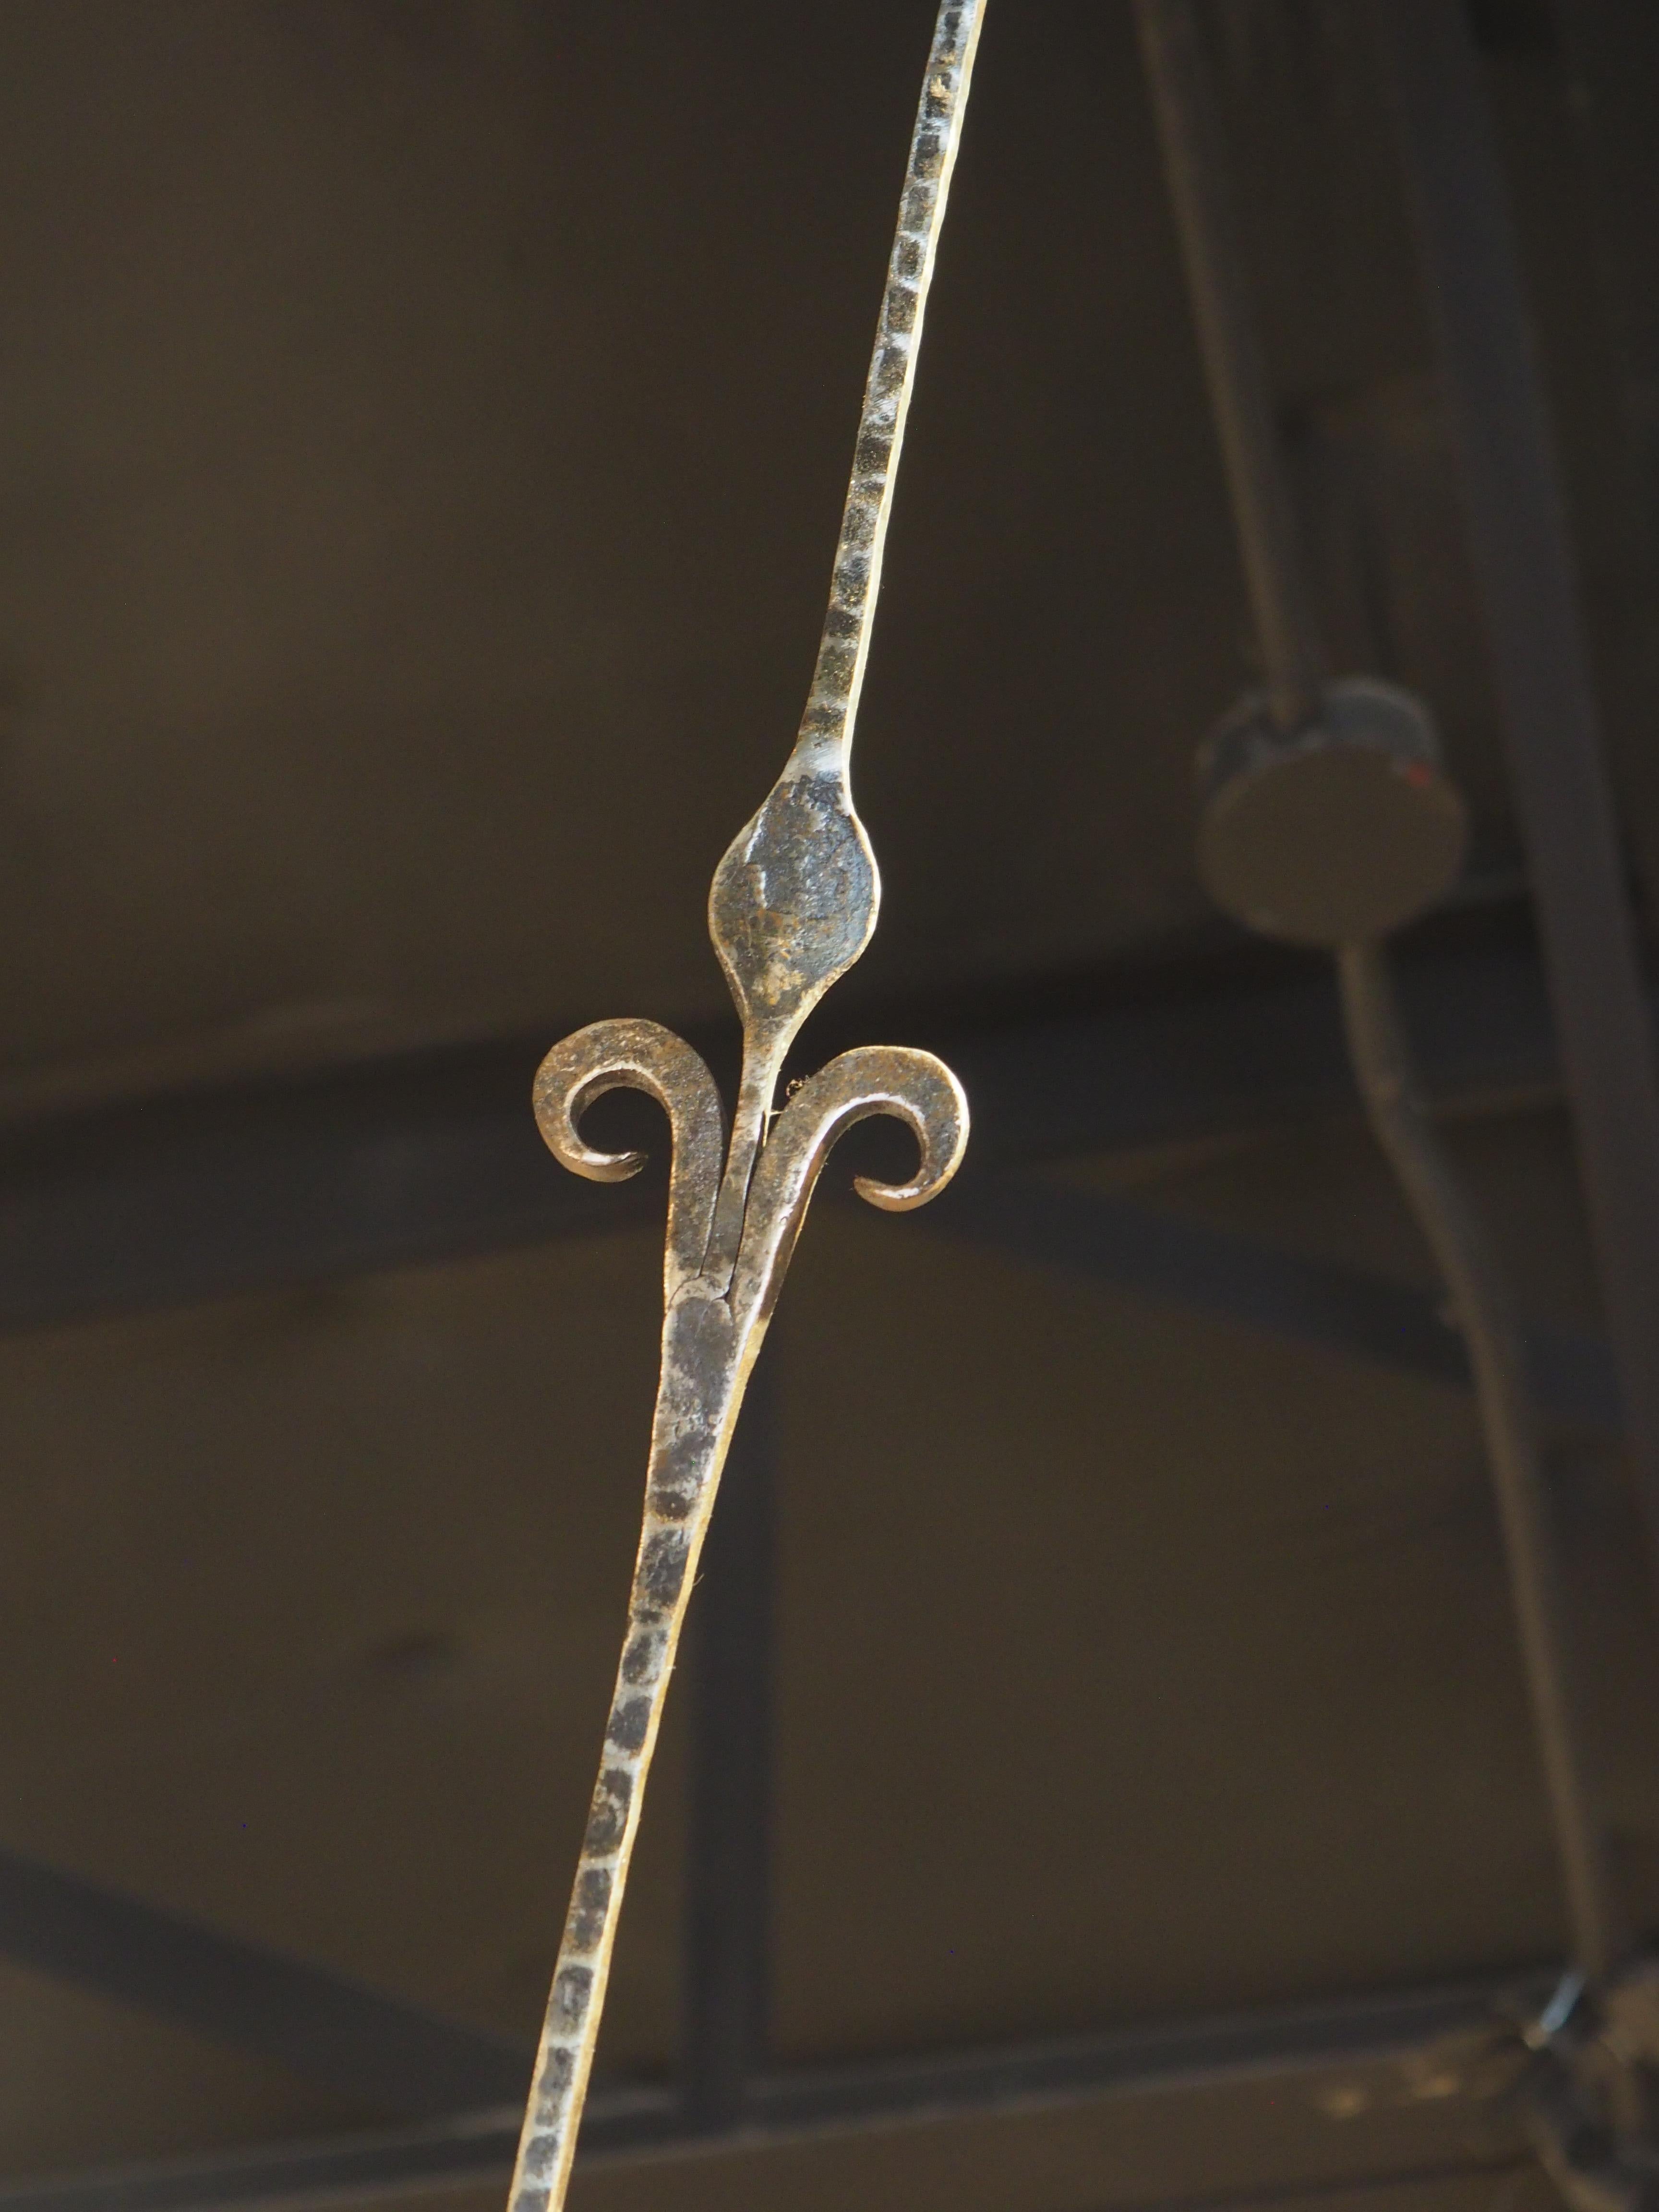 1960s Hand Wrought Iron Oval Fleur De Lys Chandelier from Brittany, France For Sale 1